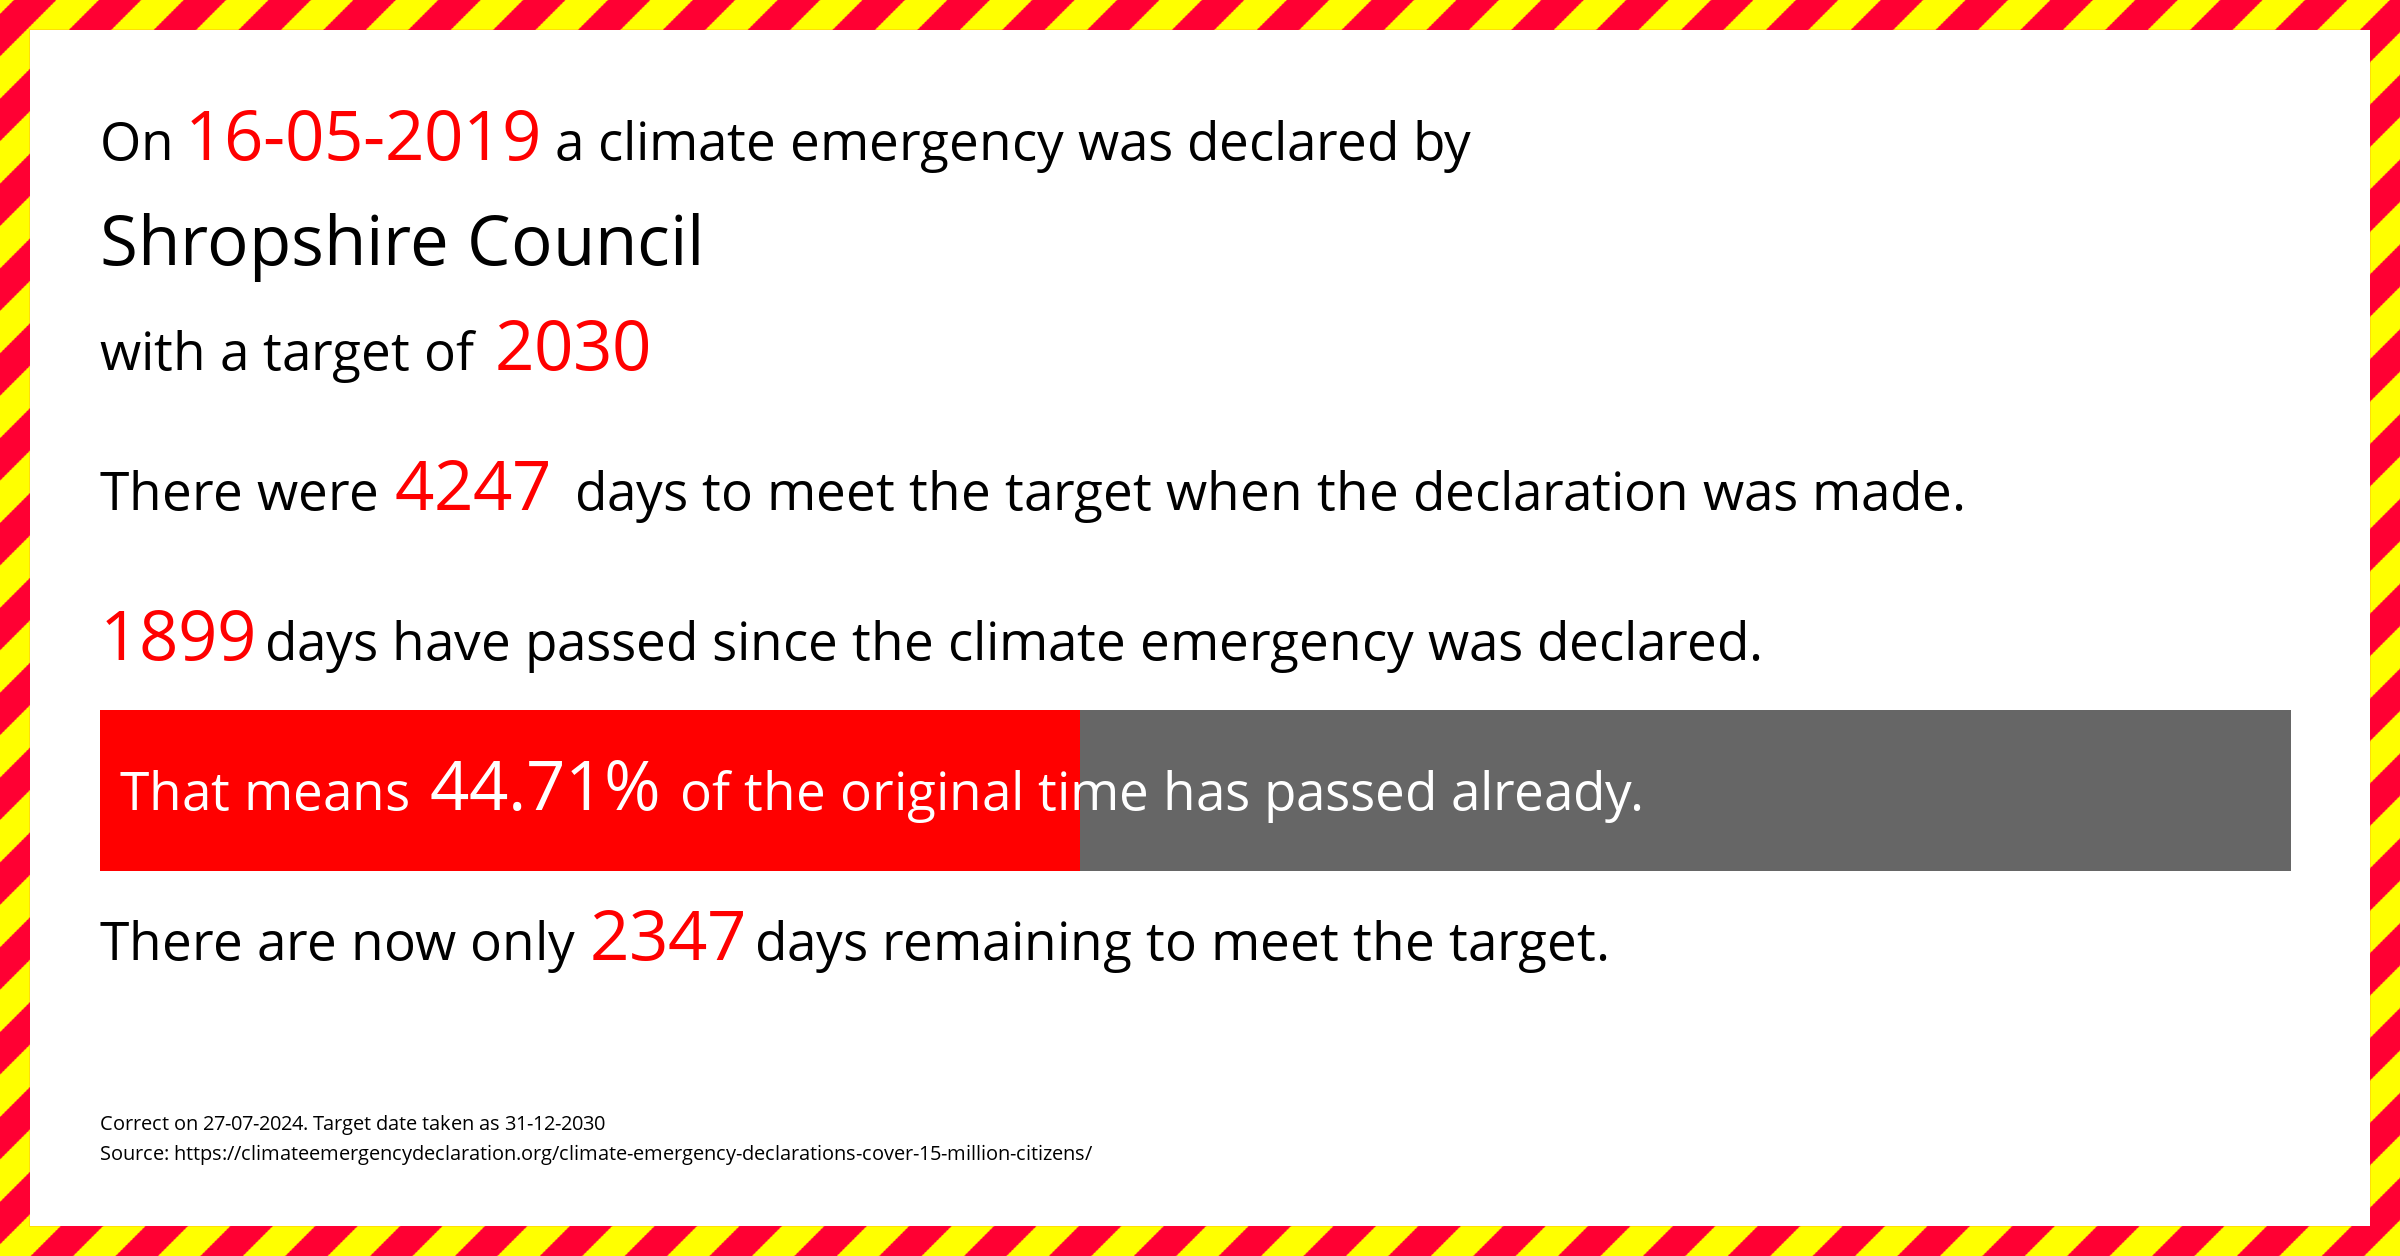 Shropshire Council declared a Climate emergency on Thursday 16th May 2019, with a target of 2030.